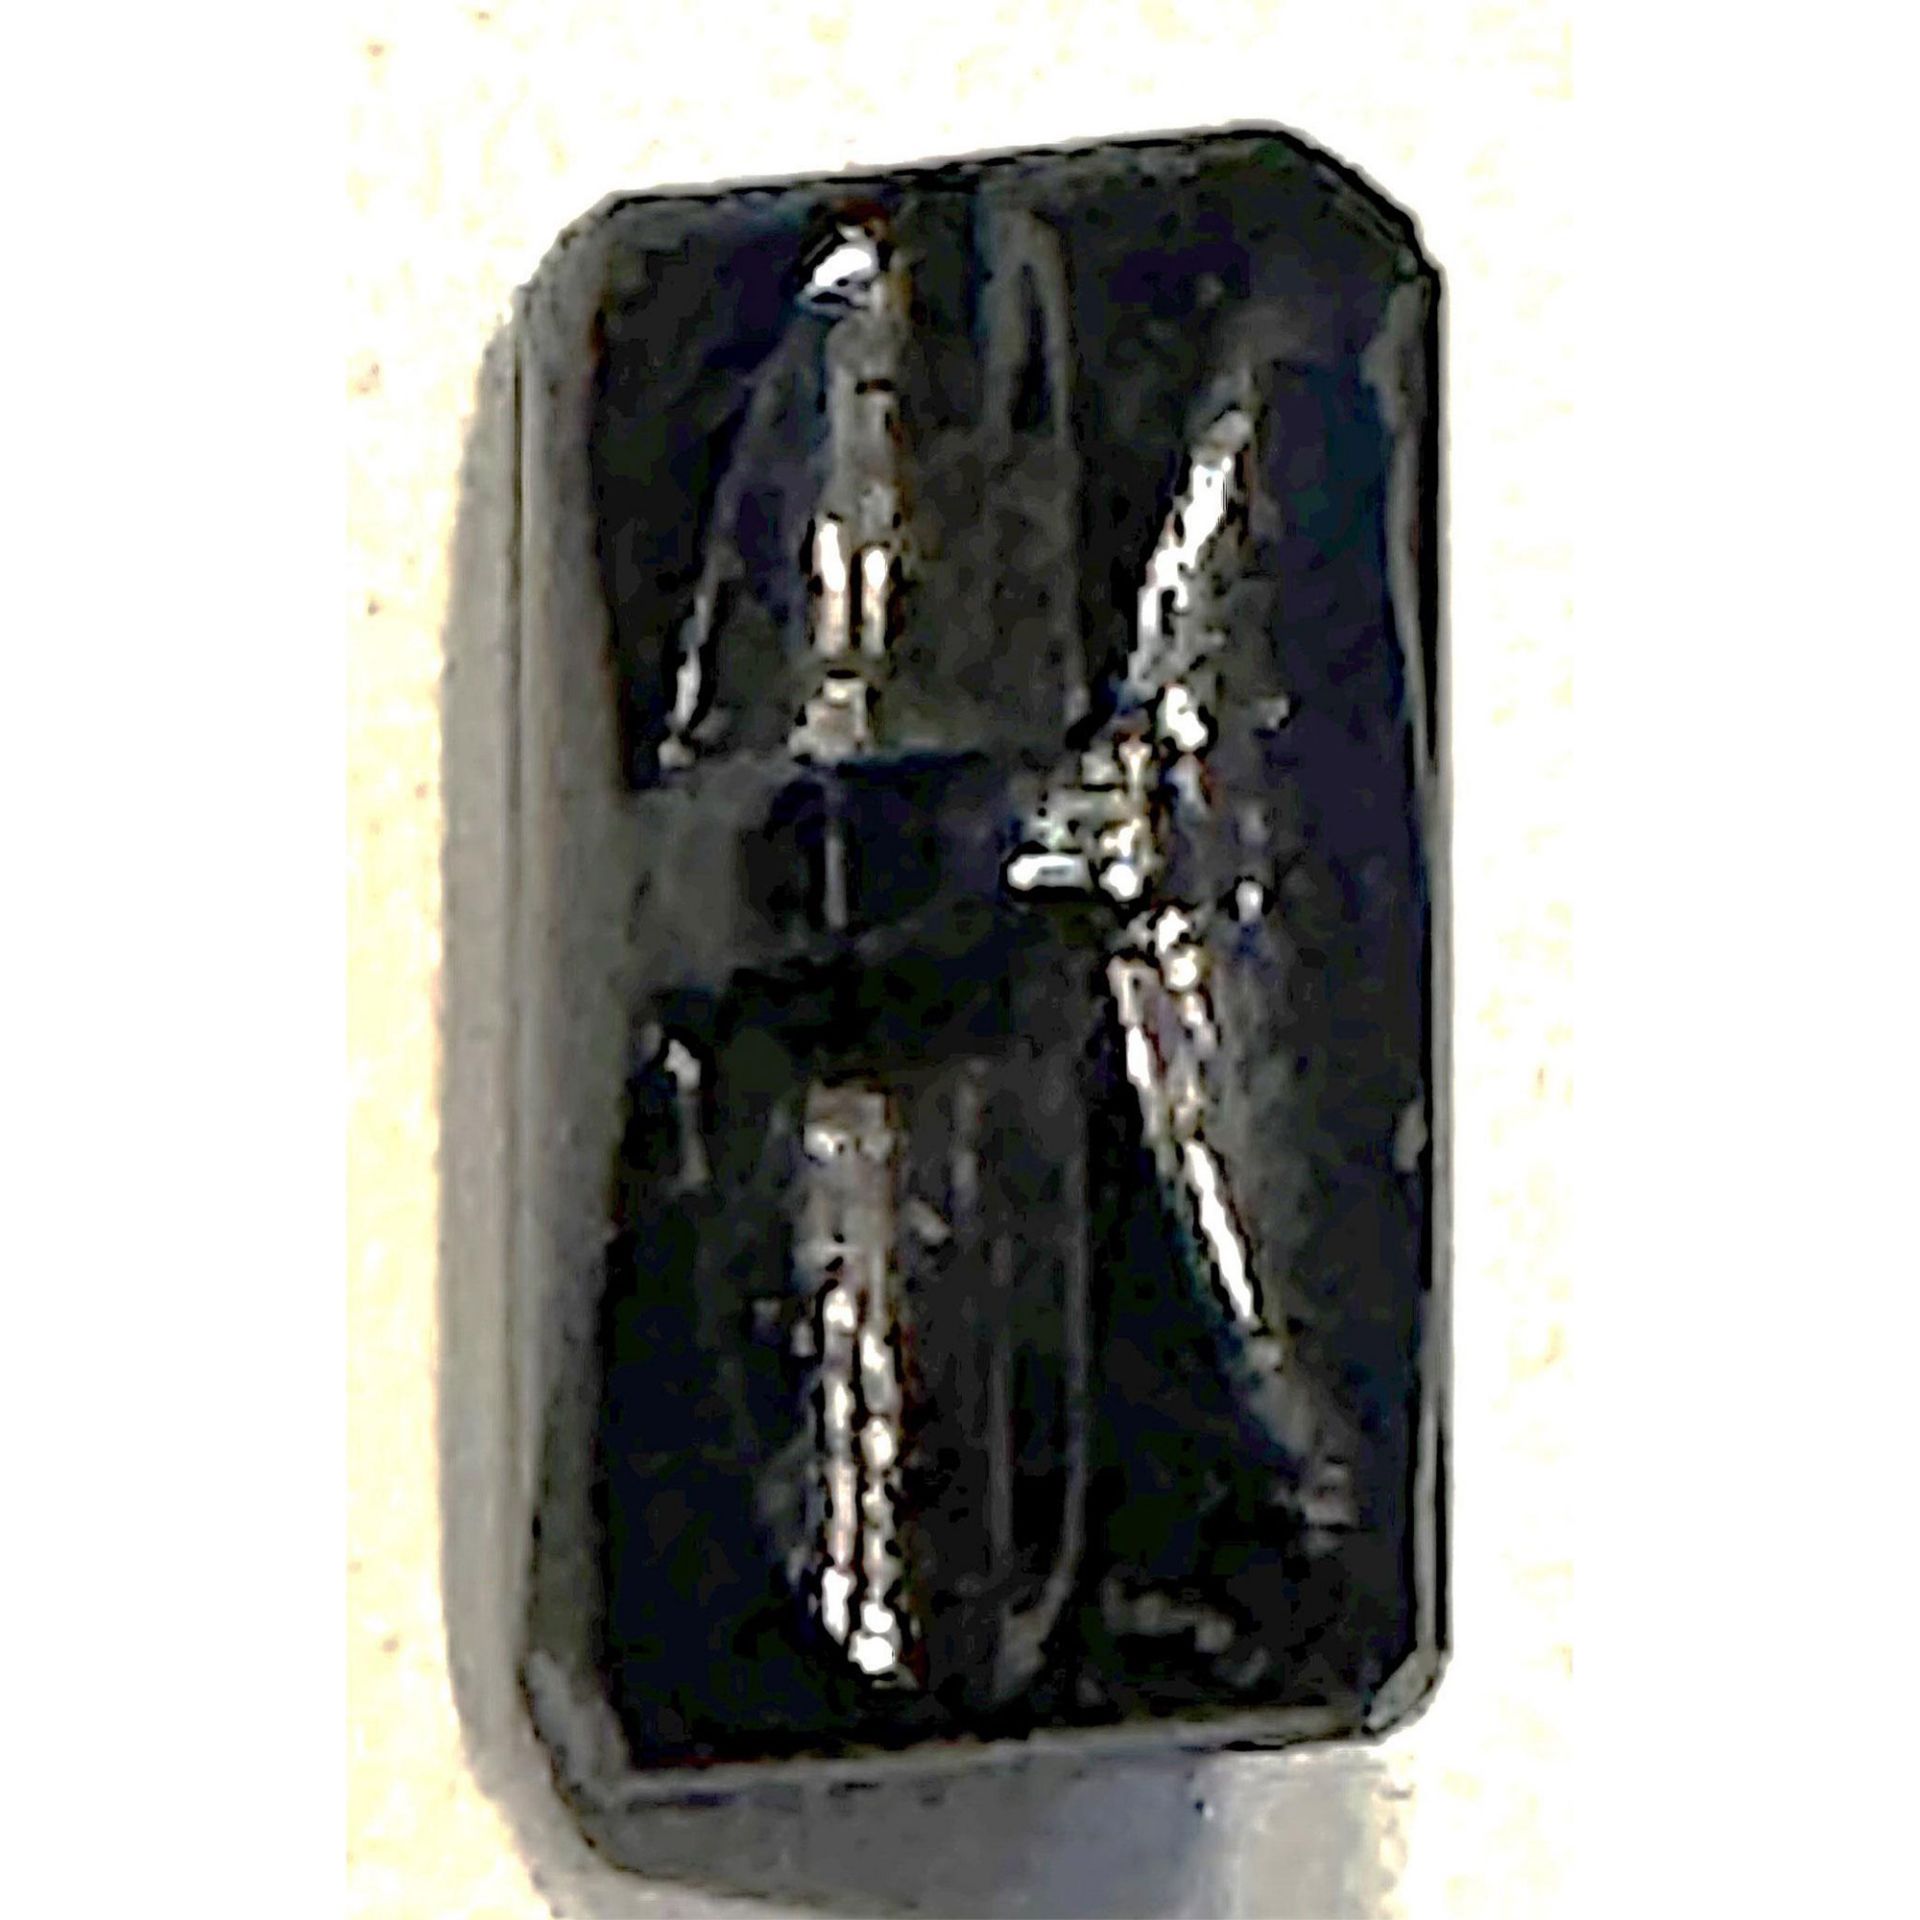 A division one scarce Tingue glass button - Image 2 of 2